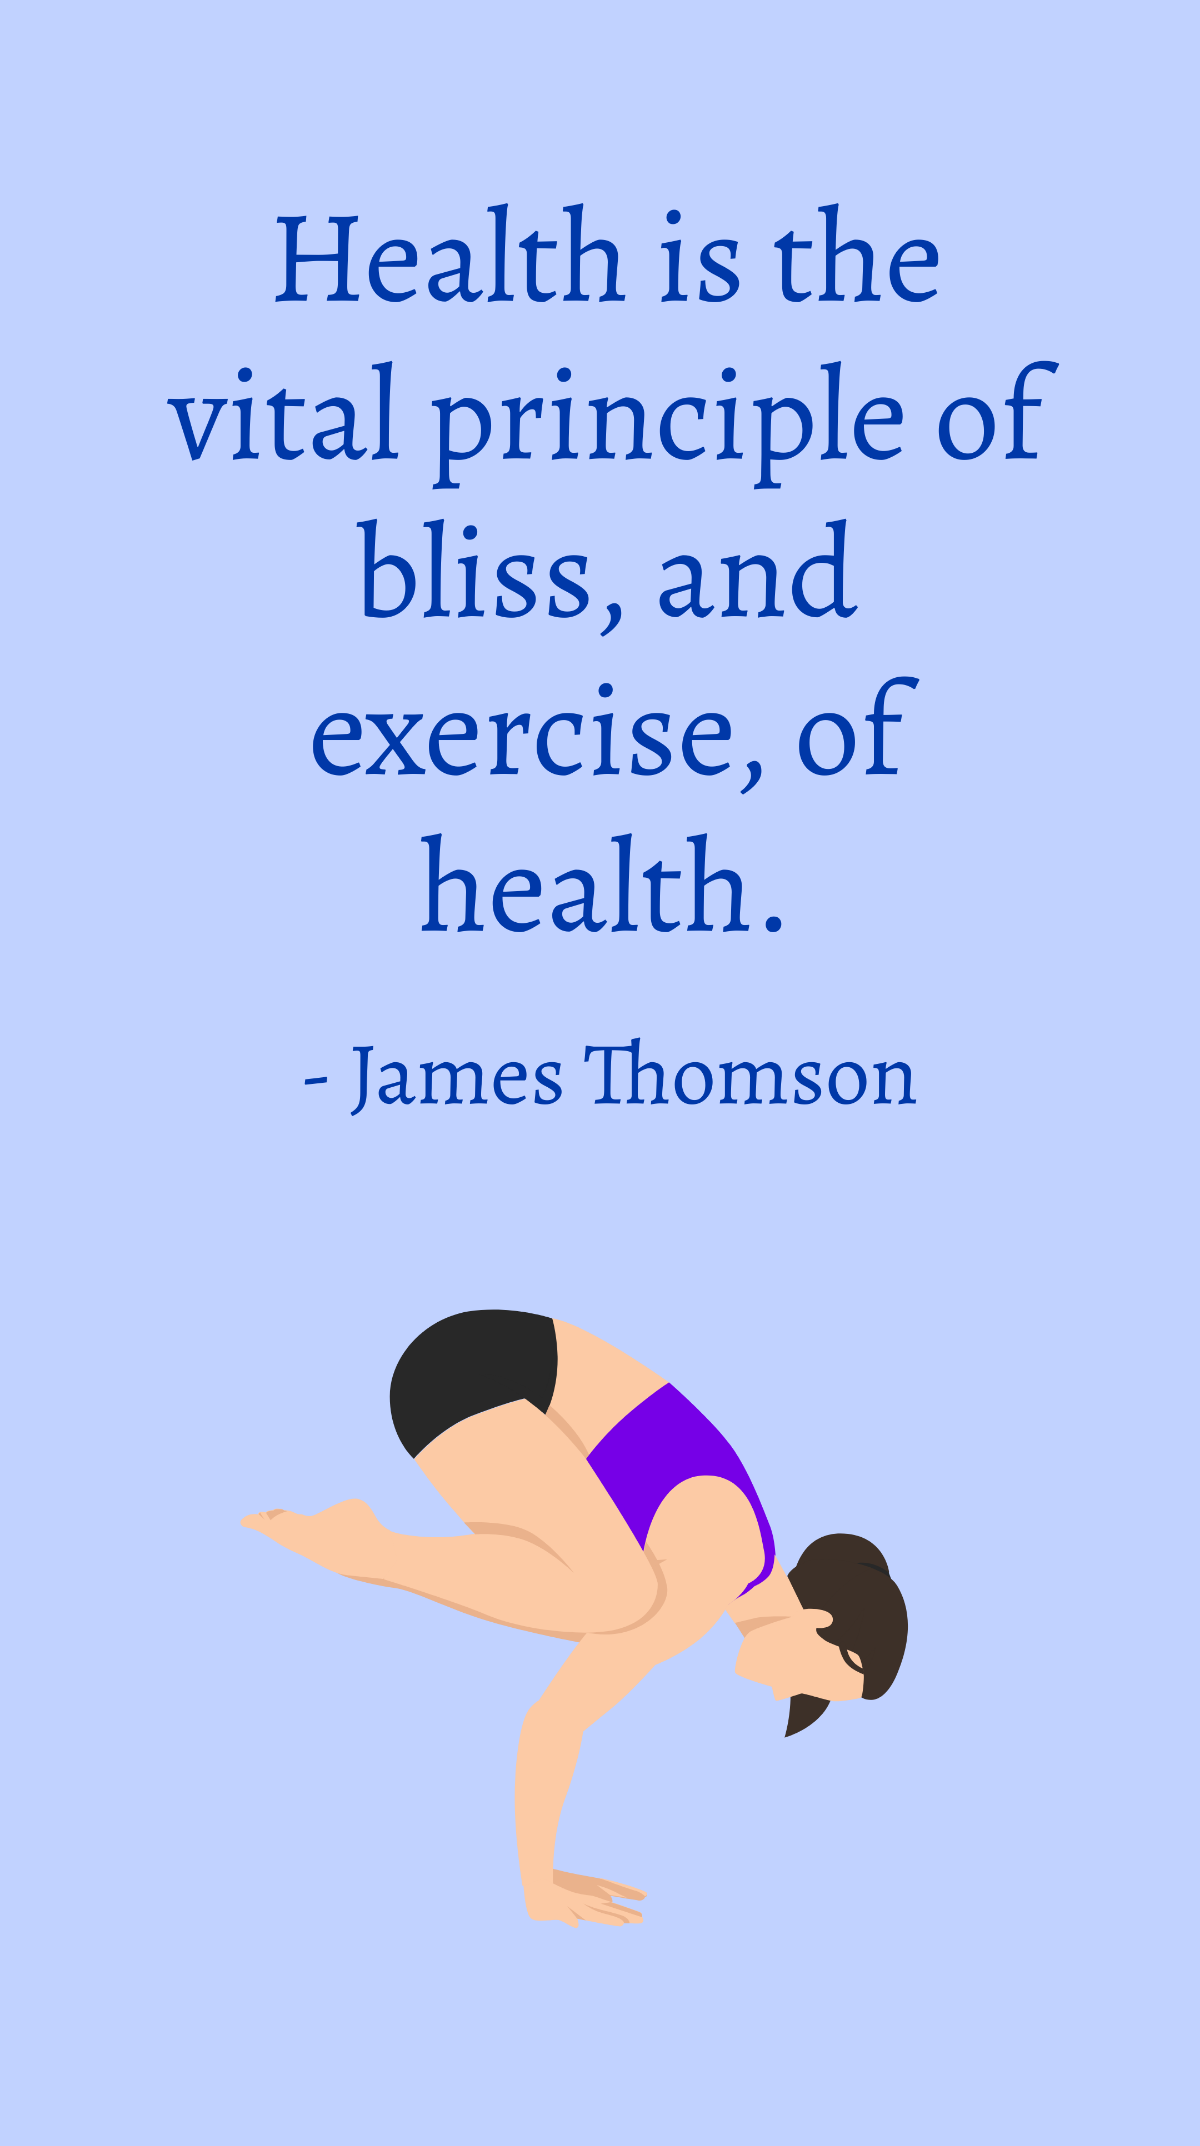 Free James Thomson - Health is the vital principle of bliss, and exercise, of health. - James Thomson Template